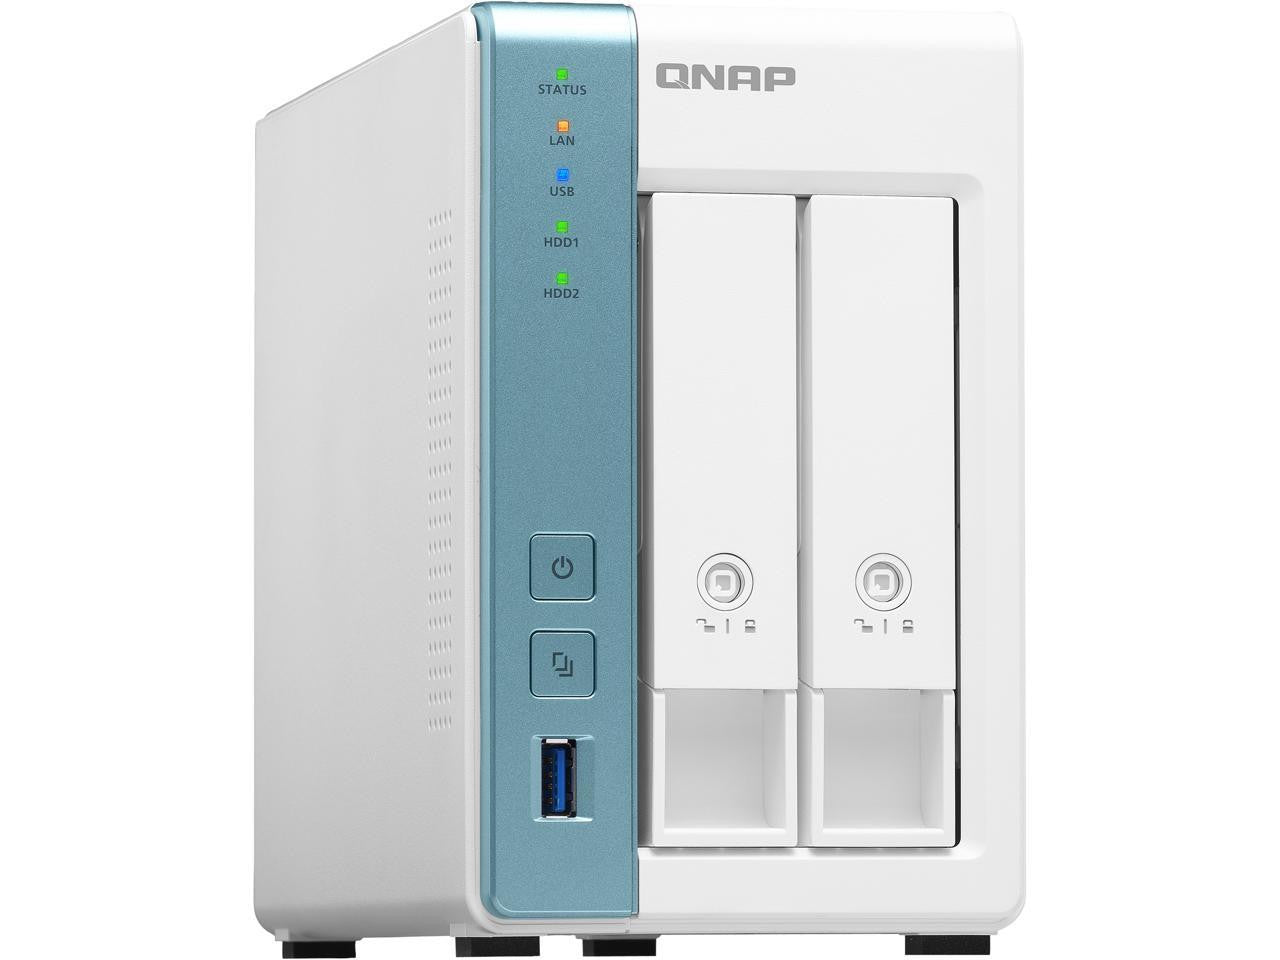 QNAP TS-231K 2-Bay Home NAS with 20TB (2 x 10TB) of Western Digital Red Plus Drives Fully Assembled and Tested